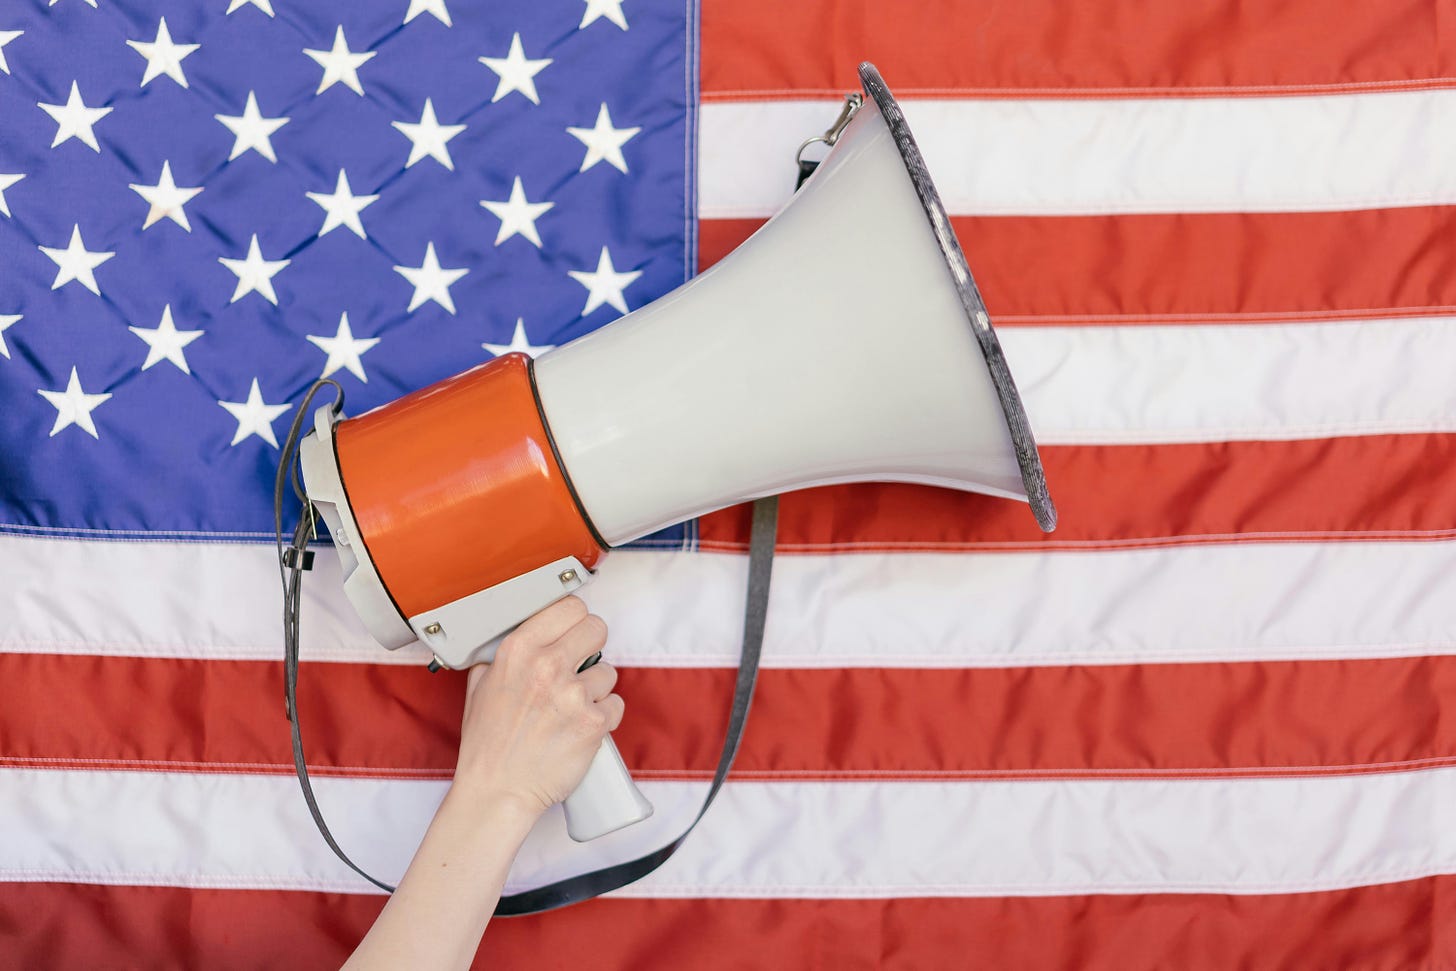 A pale hand hods up a megaphone in front of an American flag.